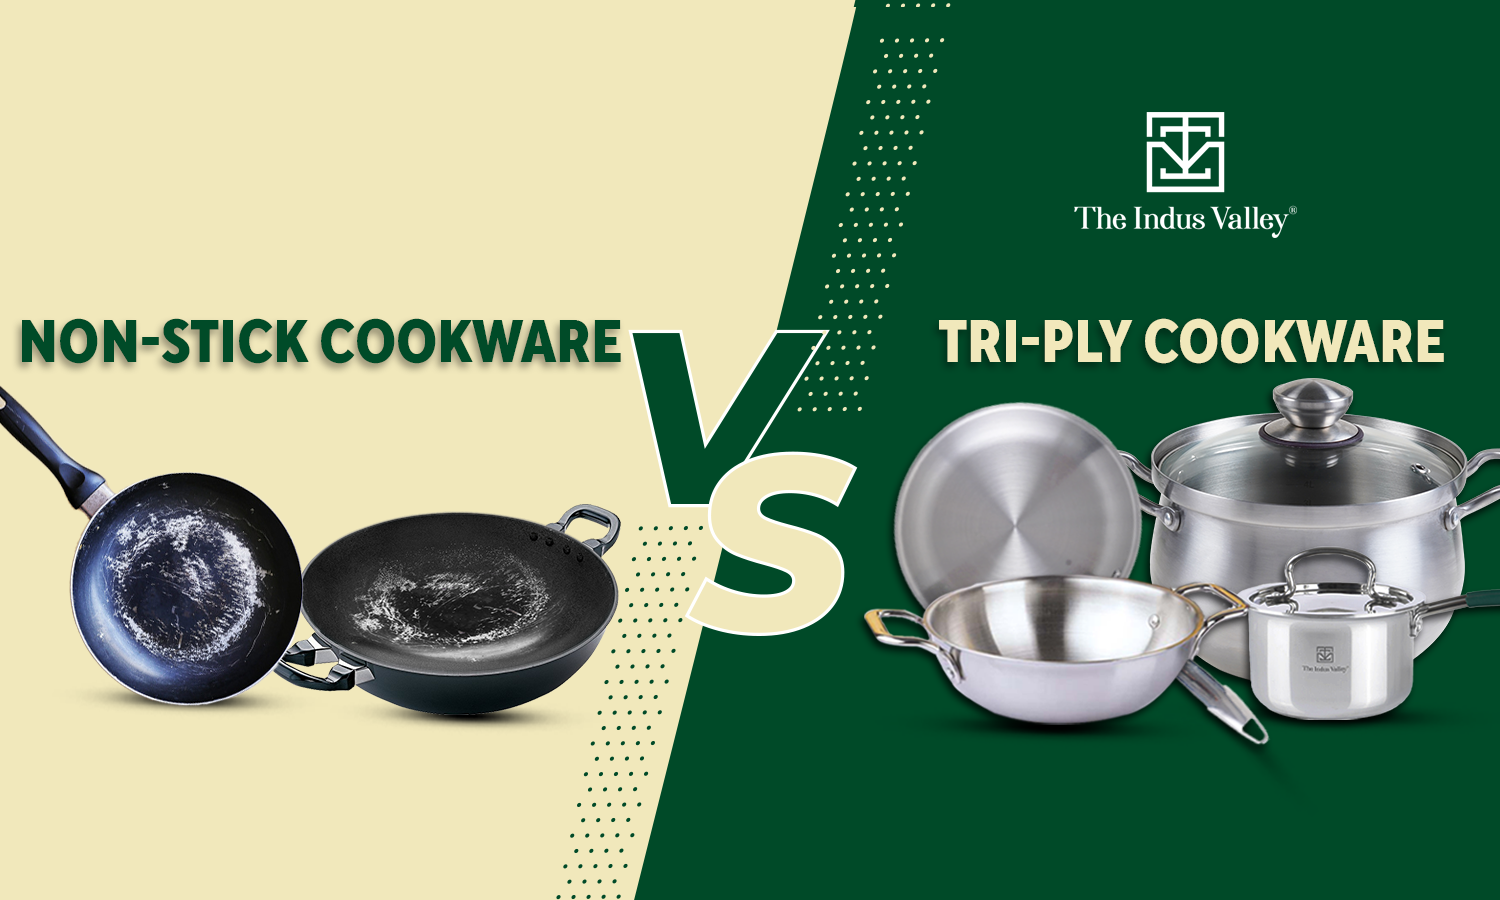 Tri-ply cookware versus non-stick cookware? — The Indus Valley